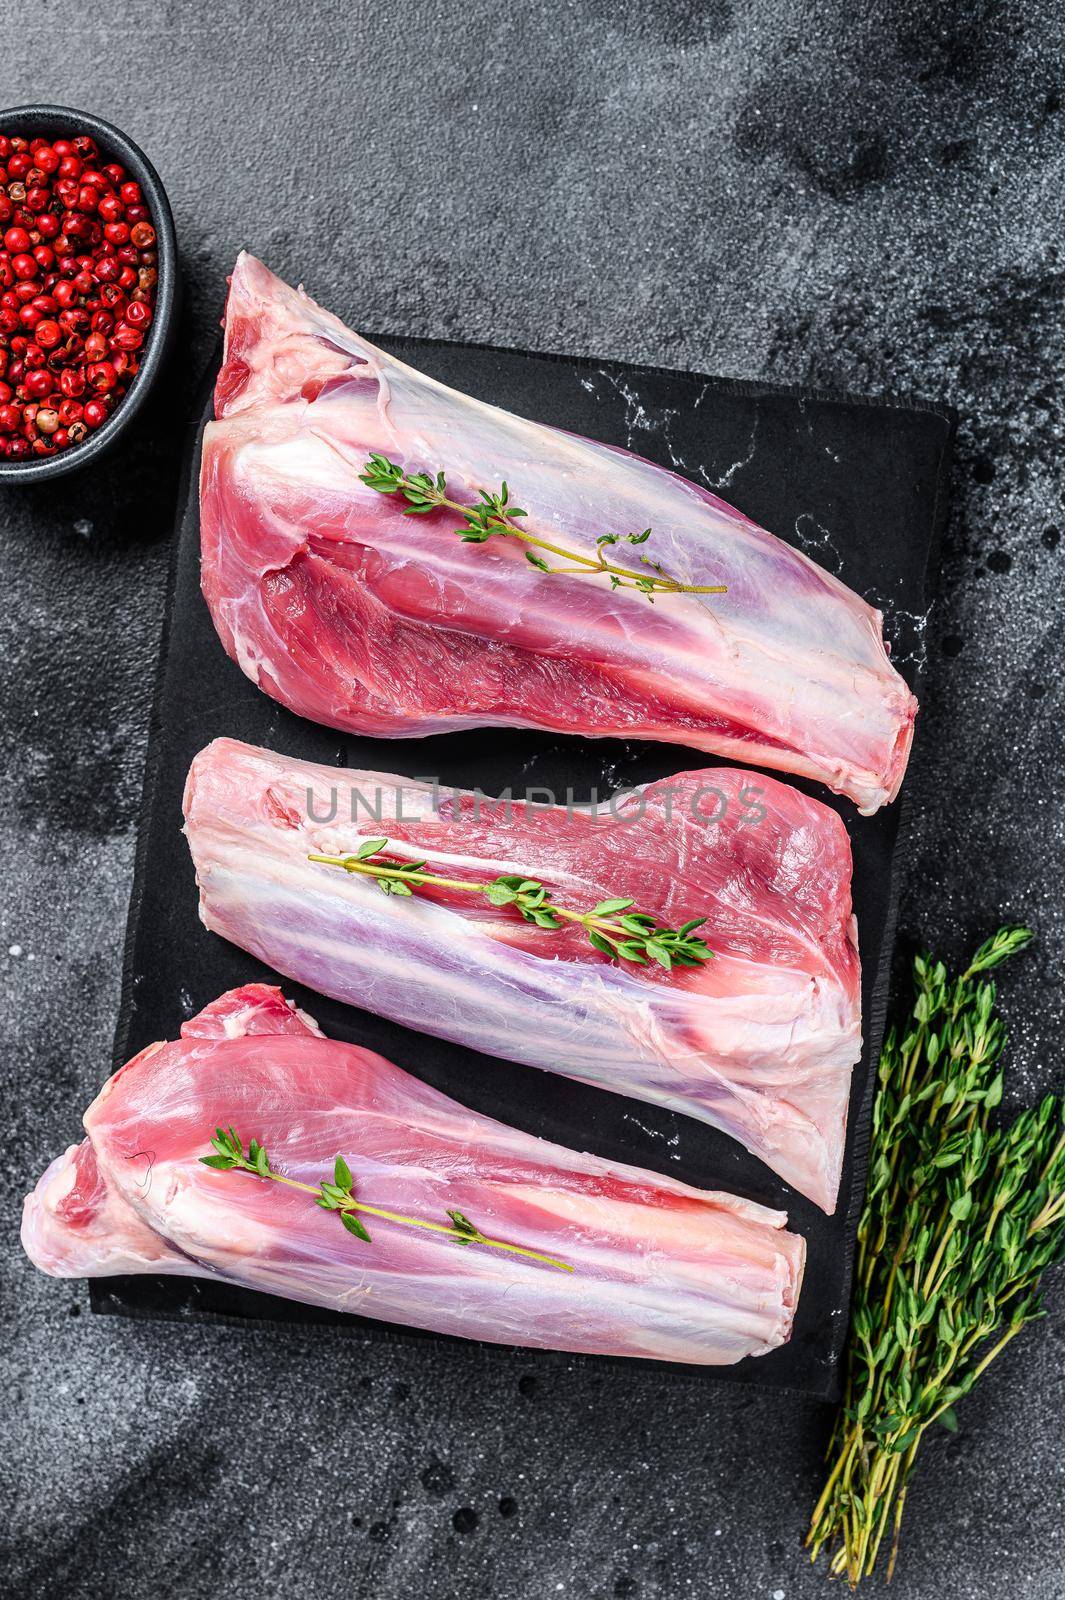 Raw lamb shanks meat on a marble board. Black background. Top view by Composter